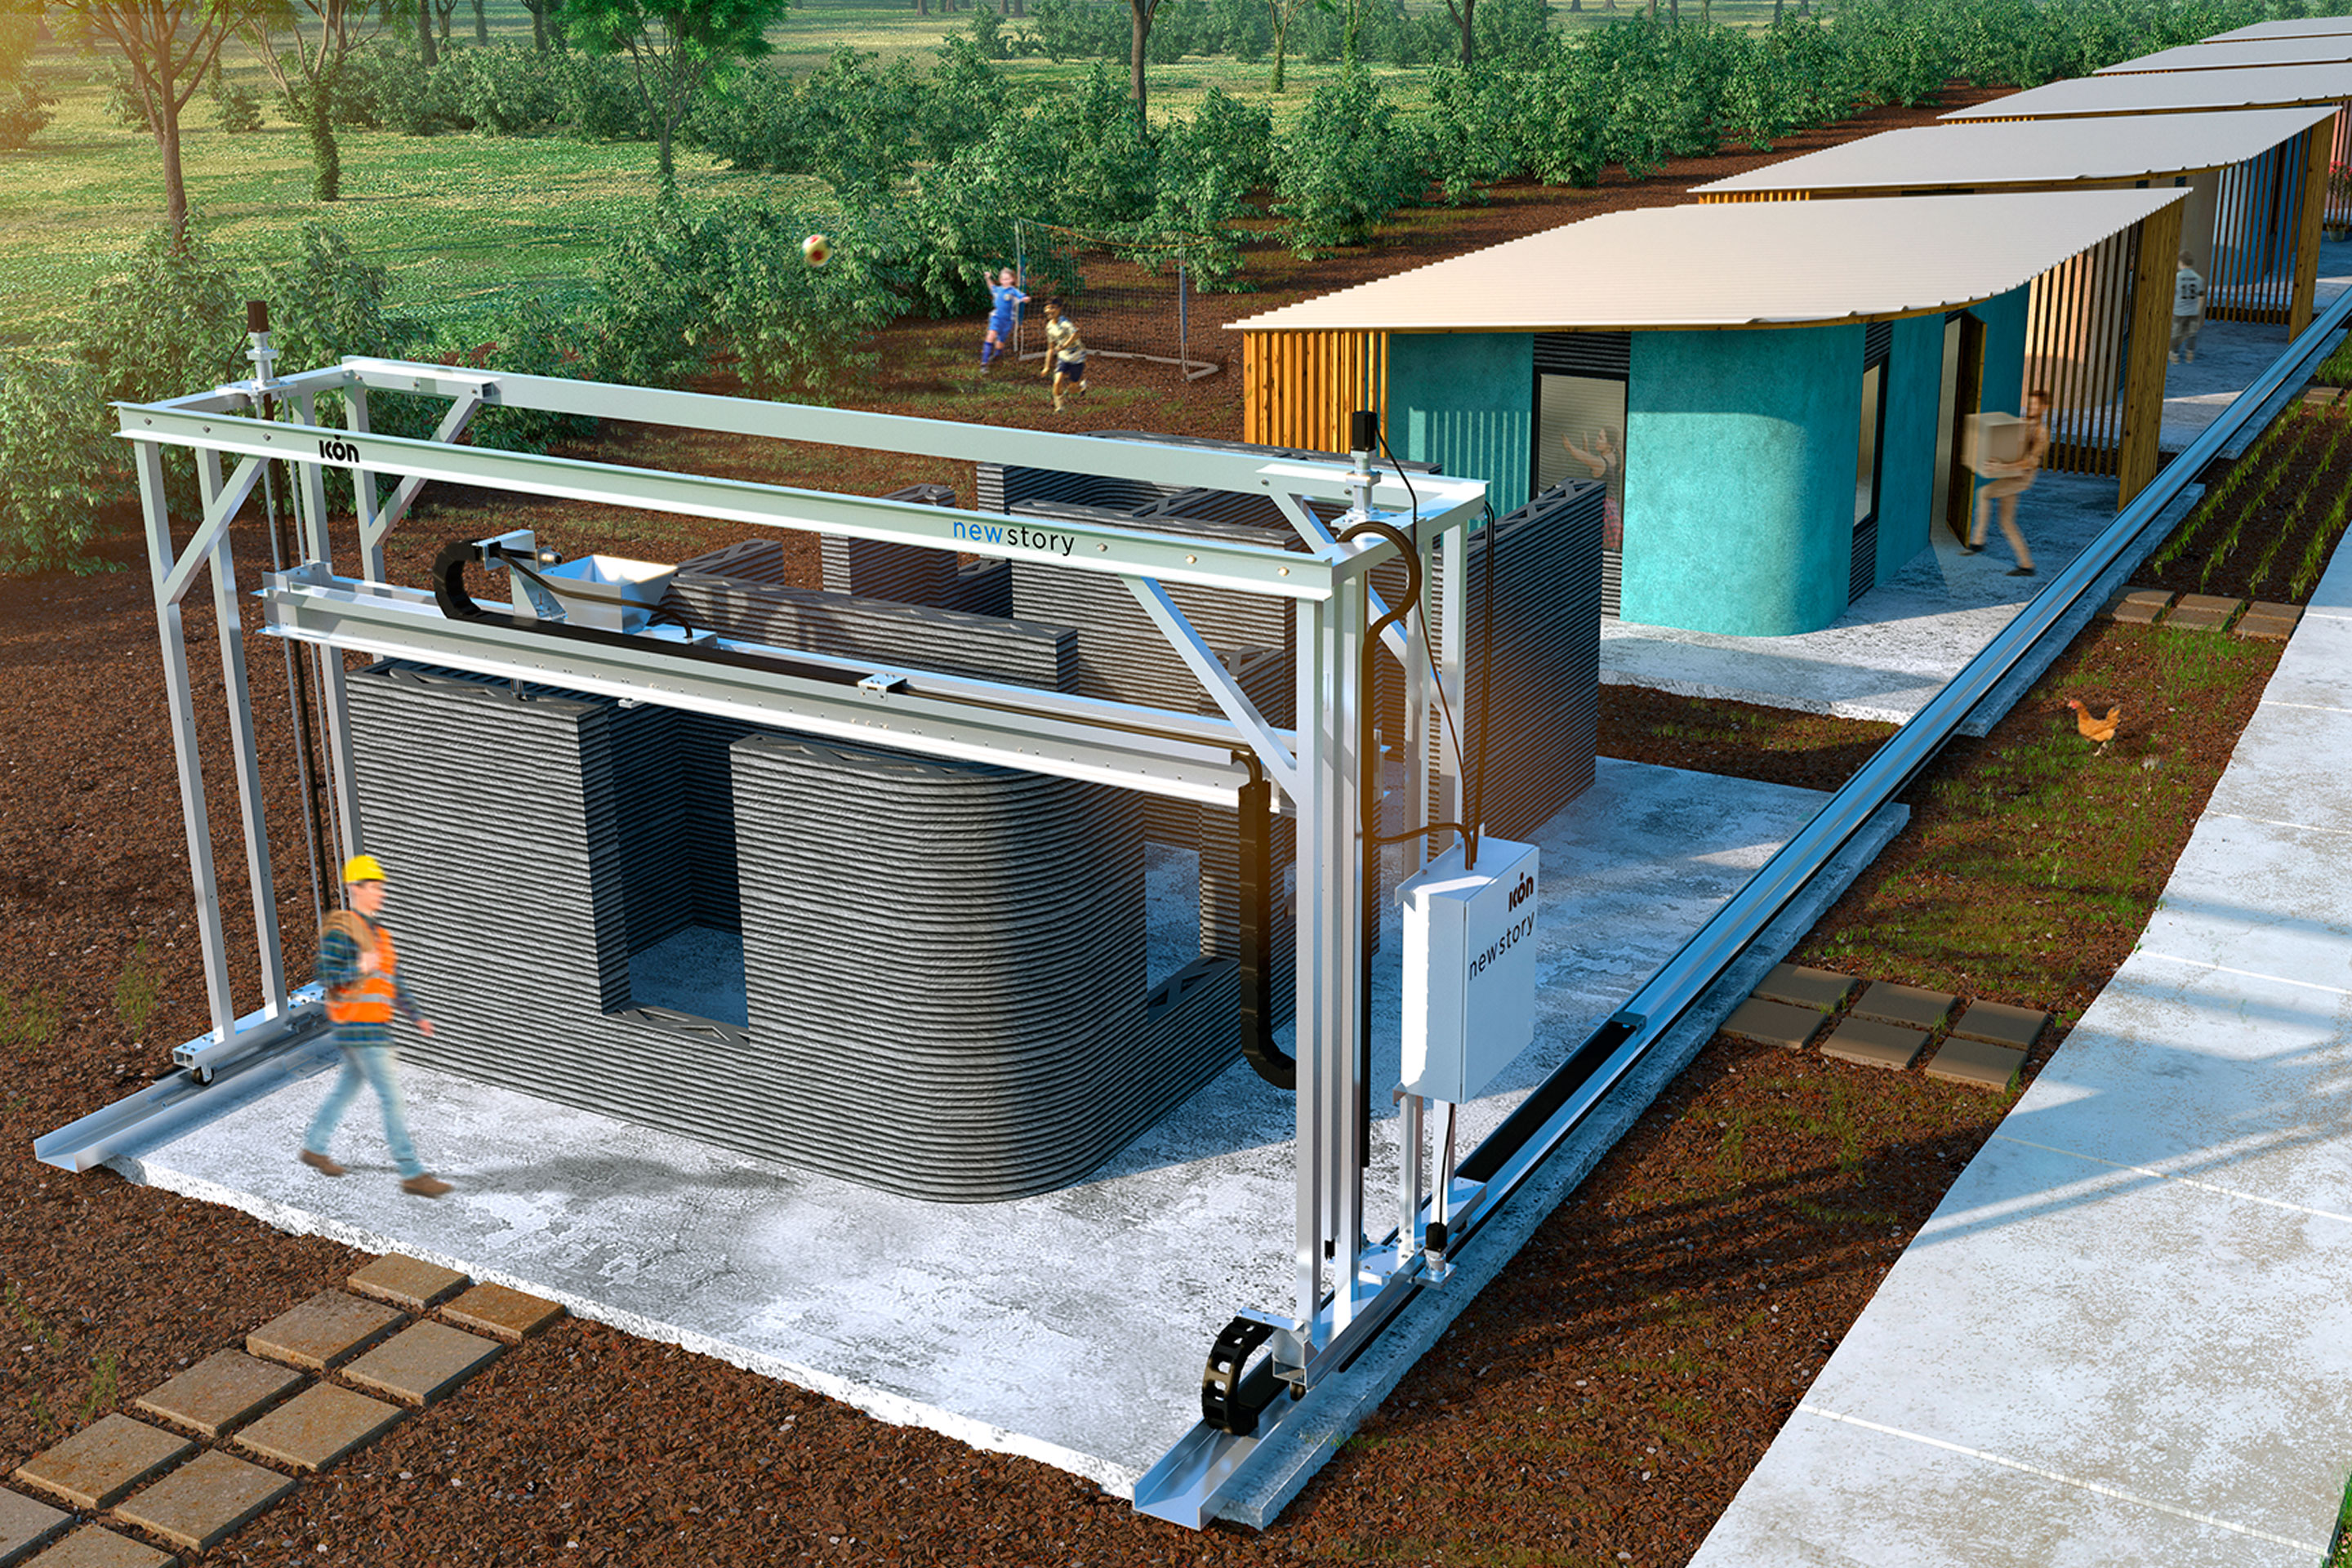 Kenya’s first 3D-printed home set to be delivered